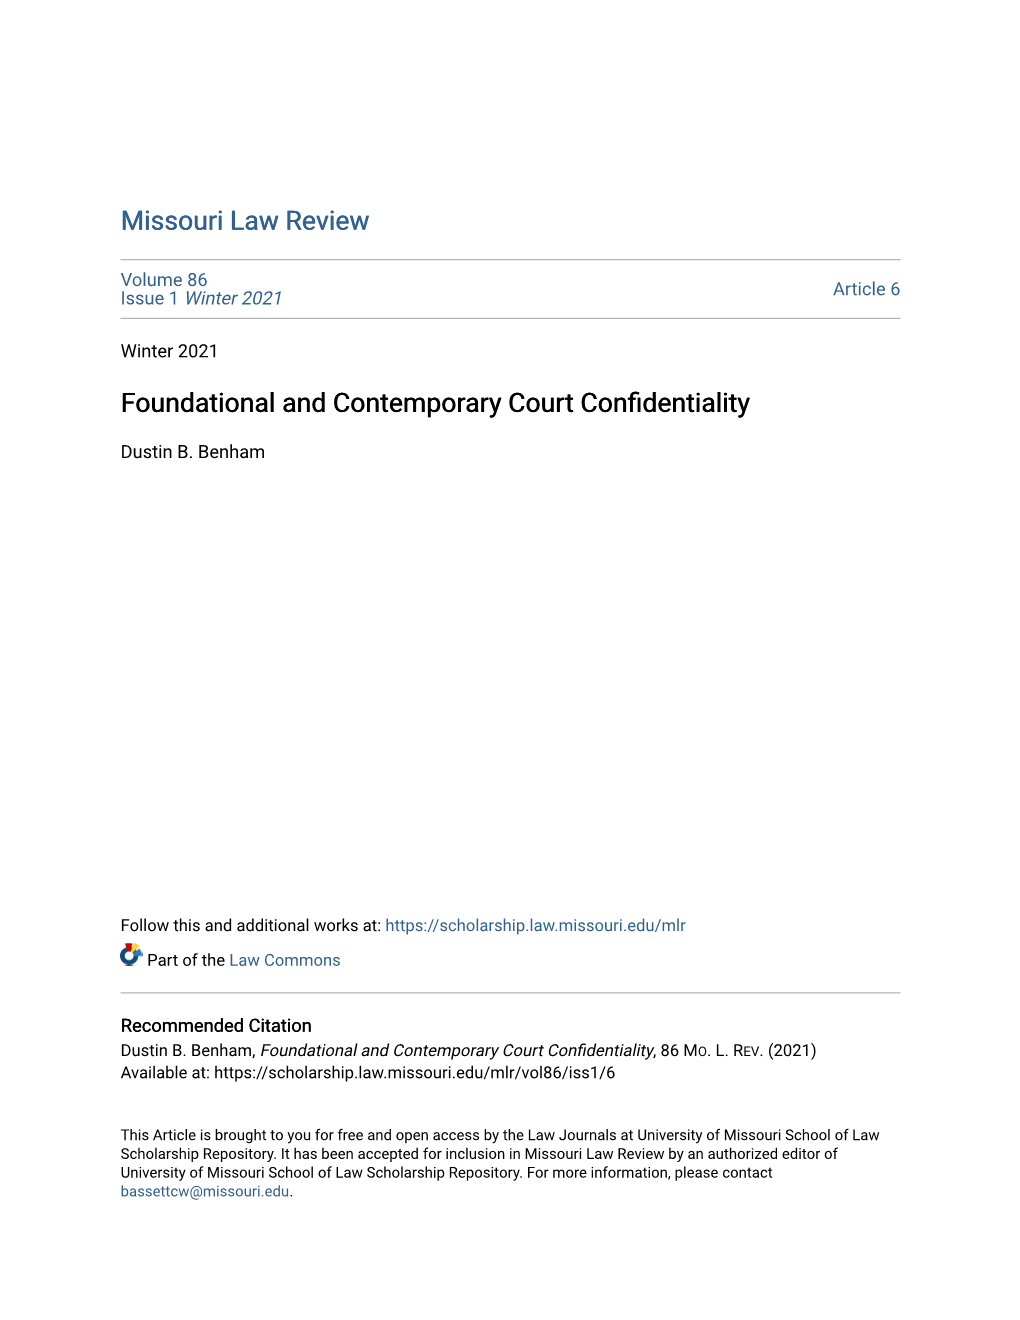 Foundational and Contemporary Court Confidentiality